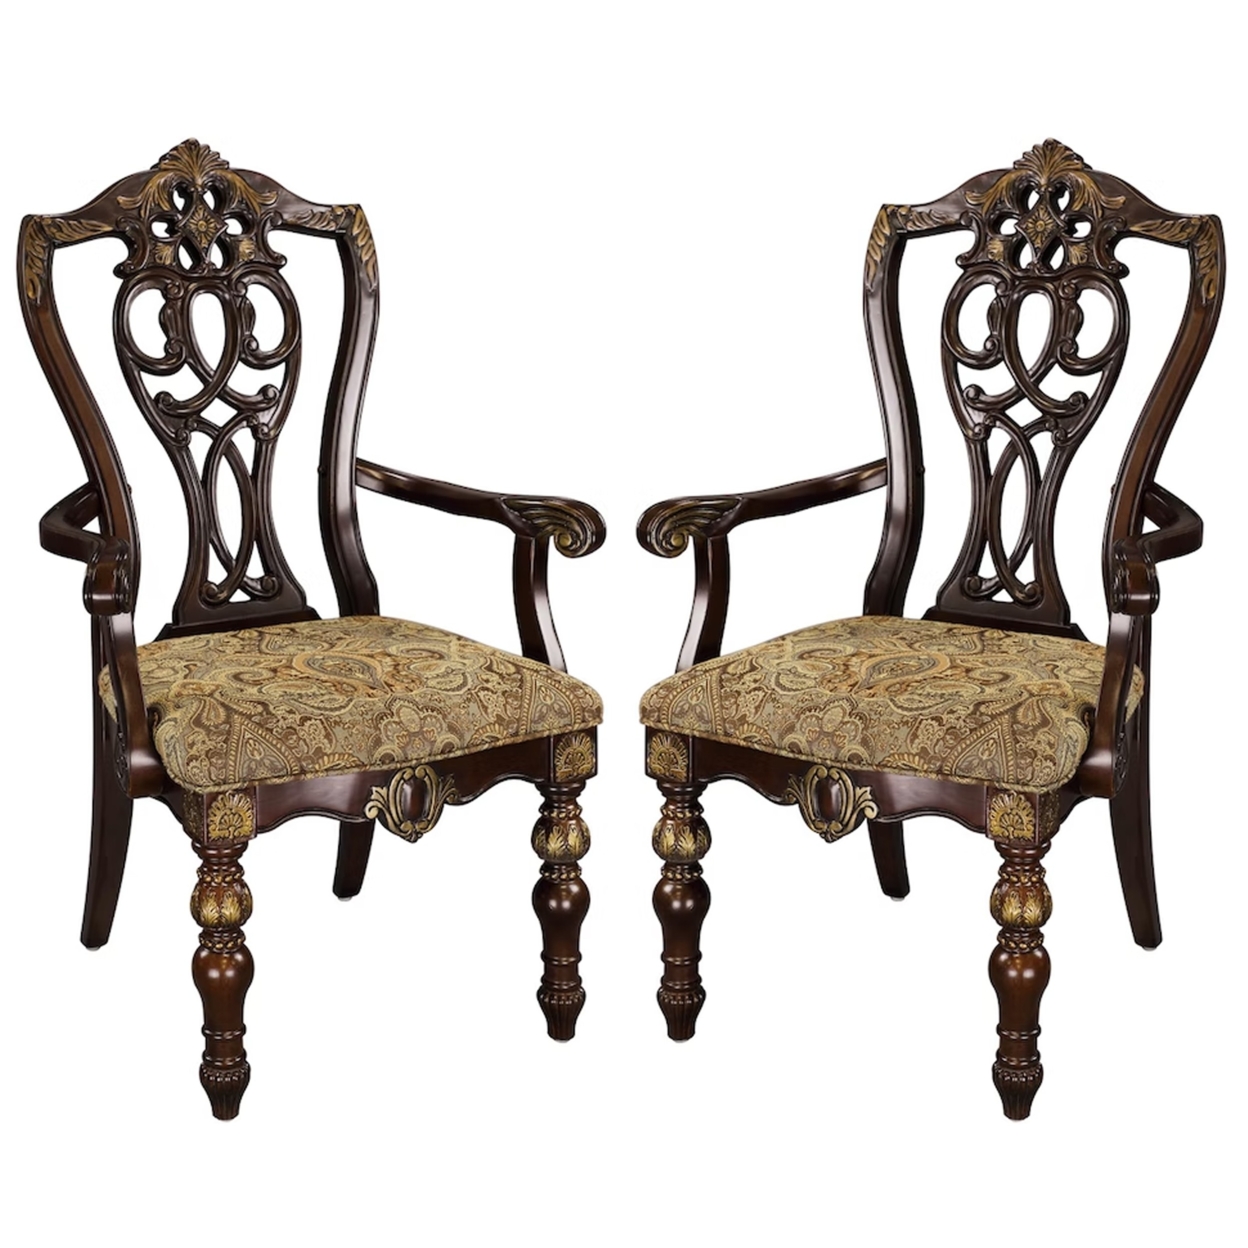 Fabric Upholstered Wooden Arm Chair With Intricate Back, Set Of 2 , Cherry Brown- Saltoro Sherpi